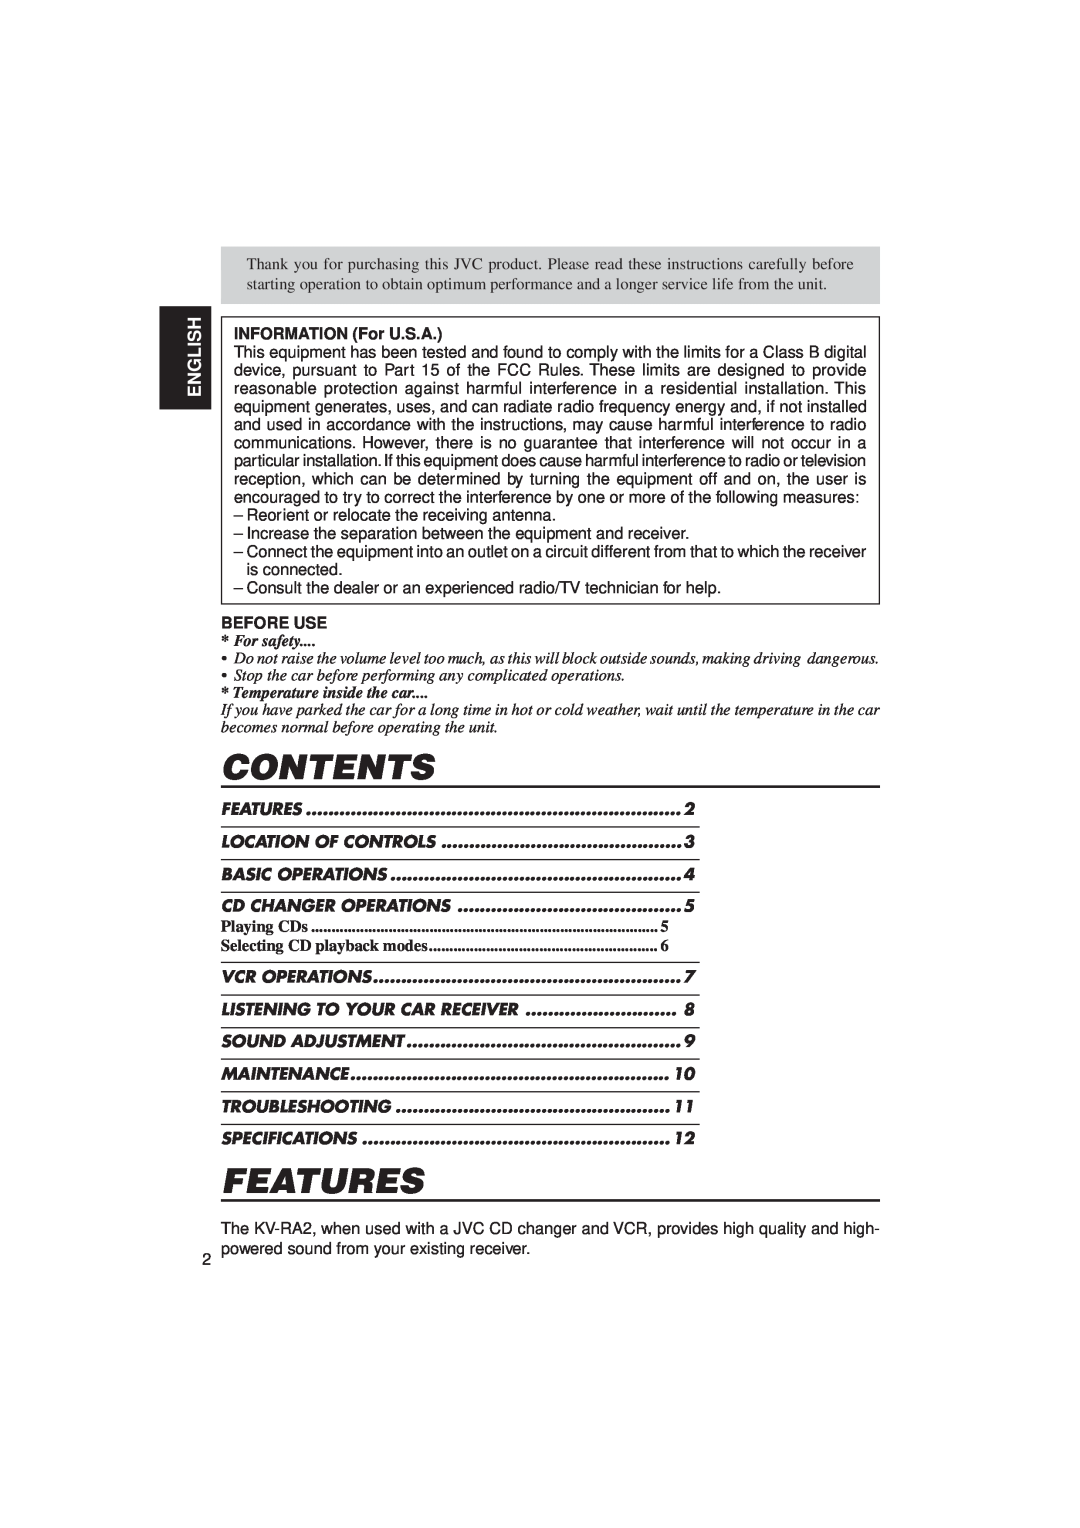 JVC KV-RA2 manual Contents, Features, English, For safety, Temperature inside the car 